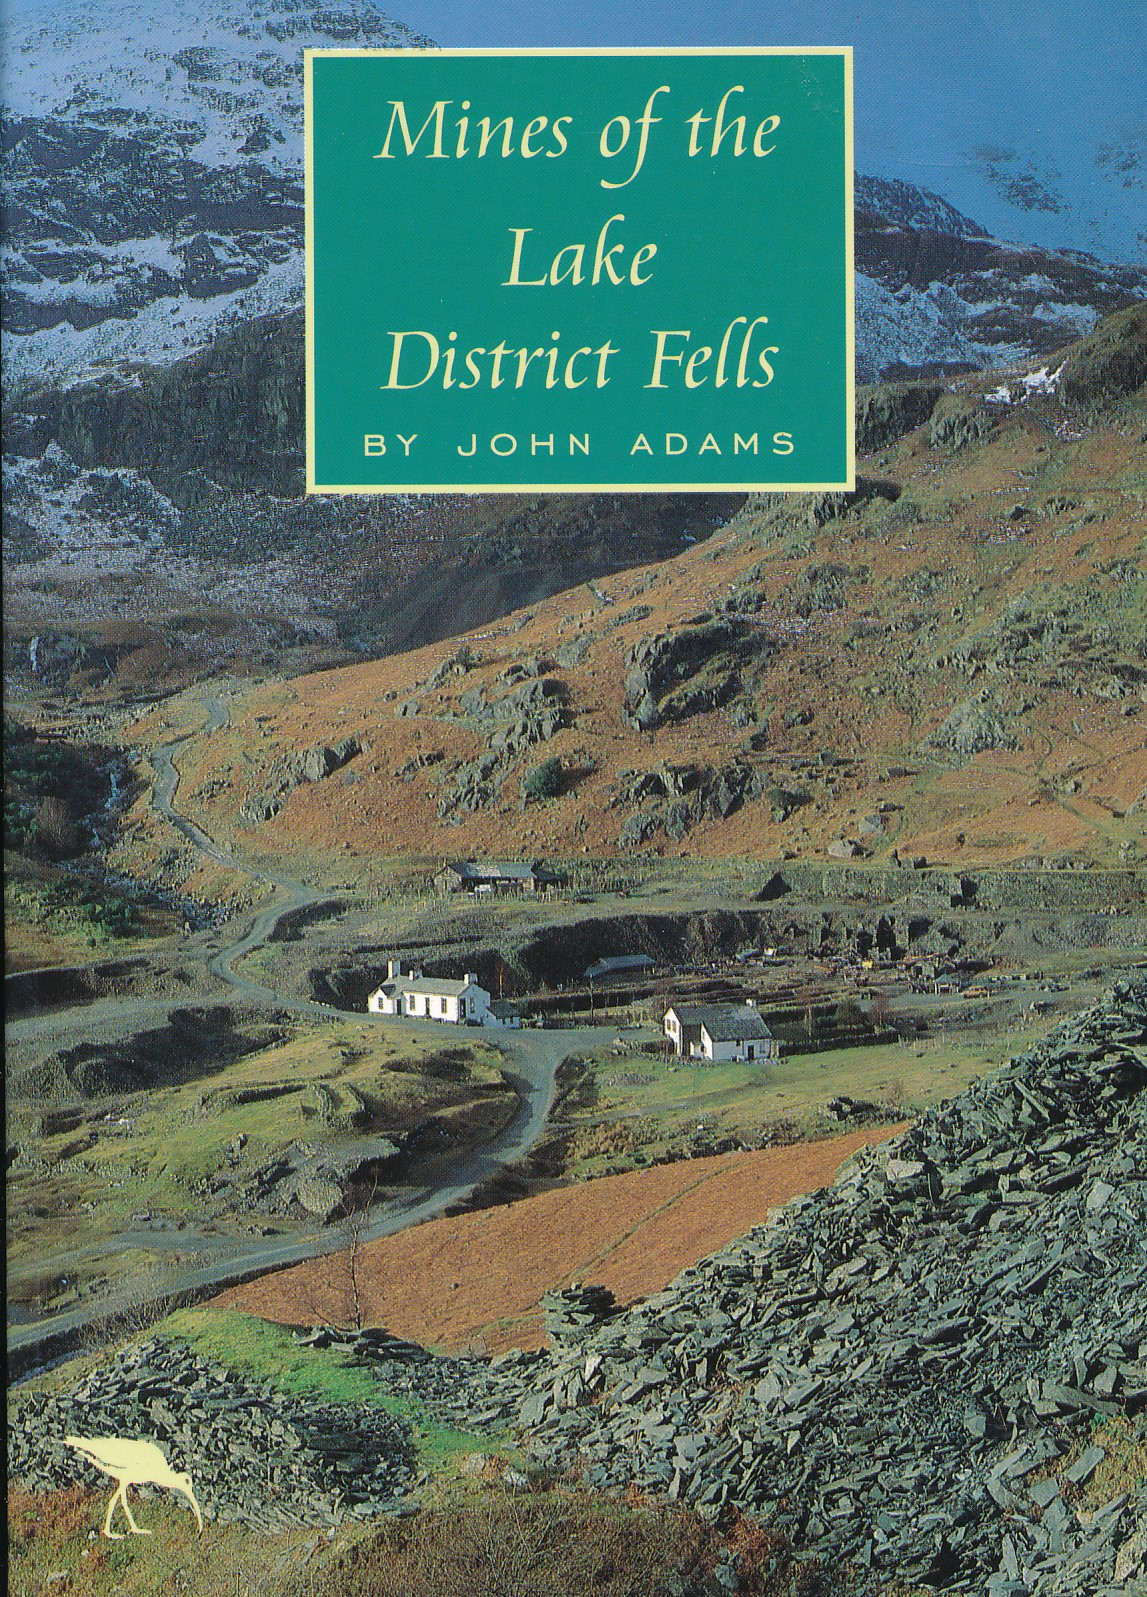 Mines of the Lake District Fells